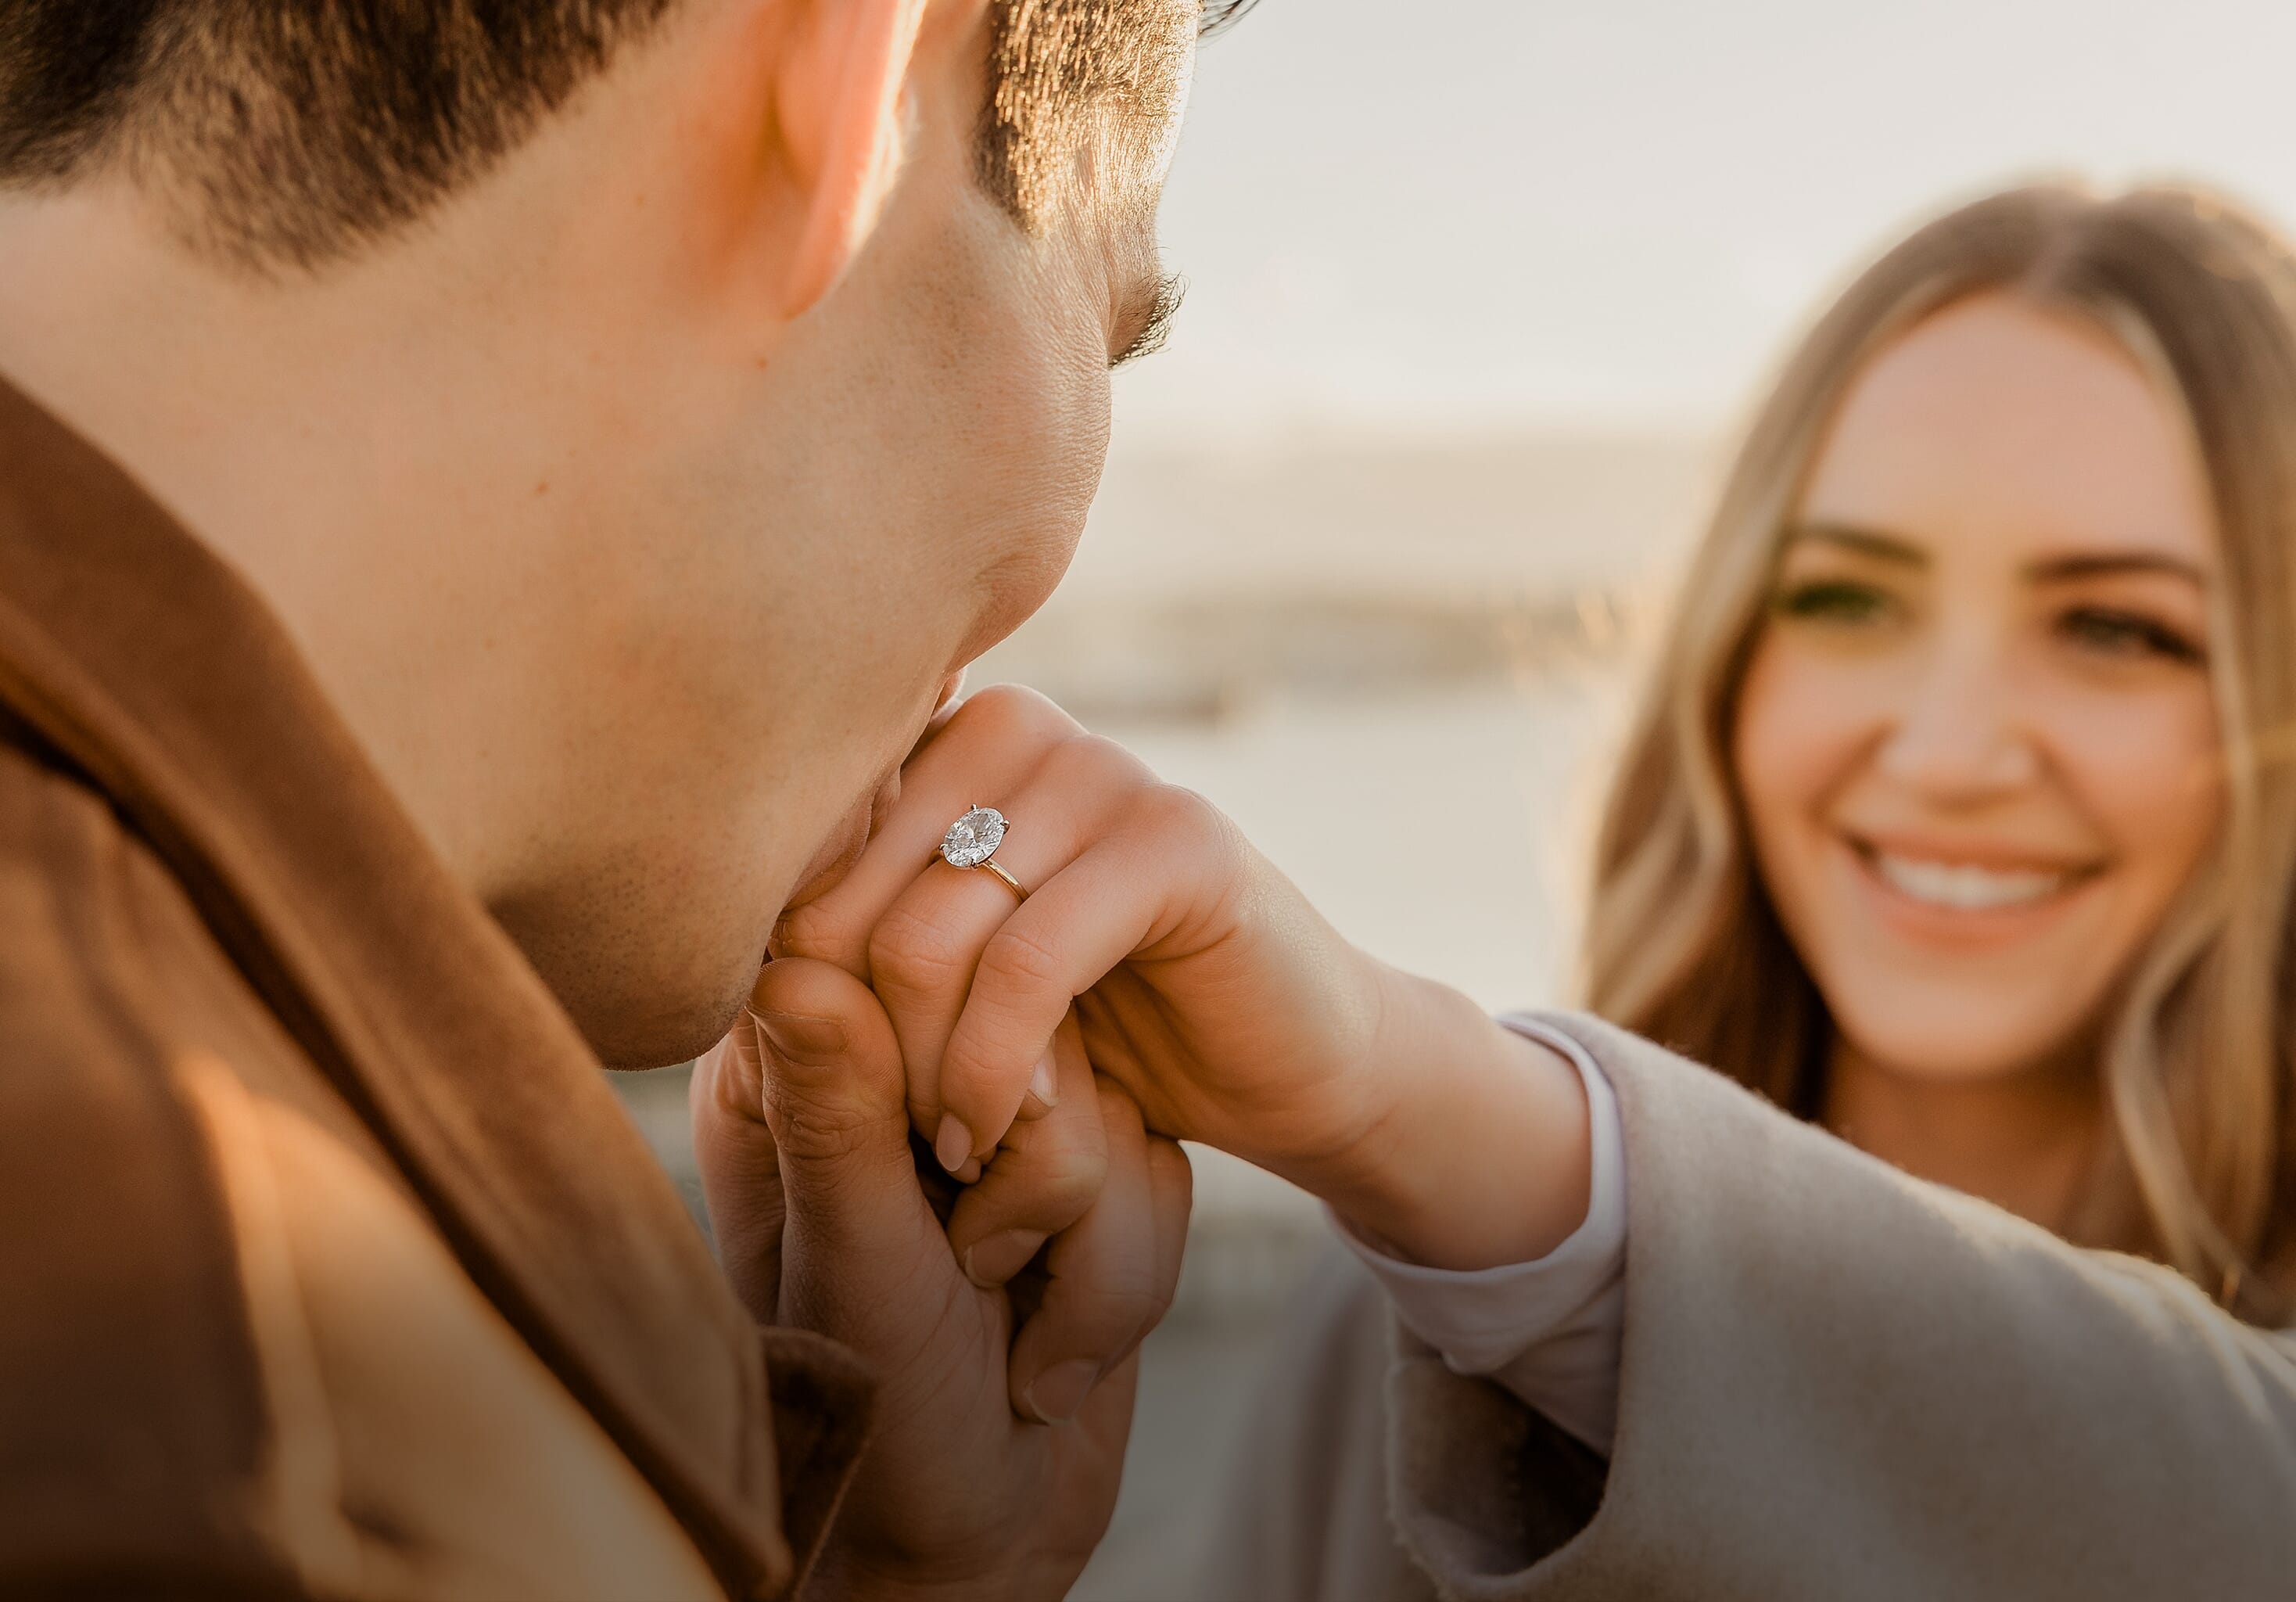 Love & Co. - Your engagement ring search starts with us.